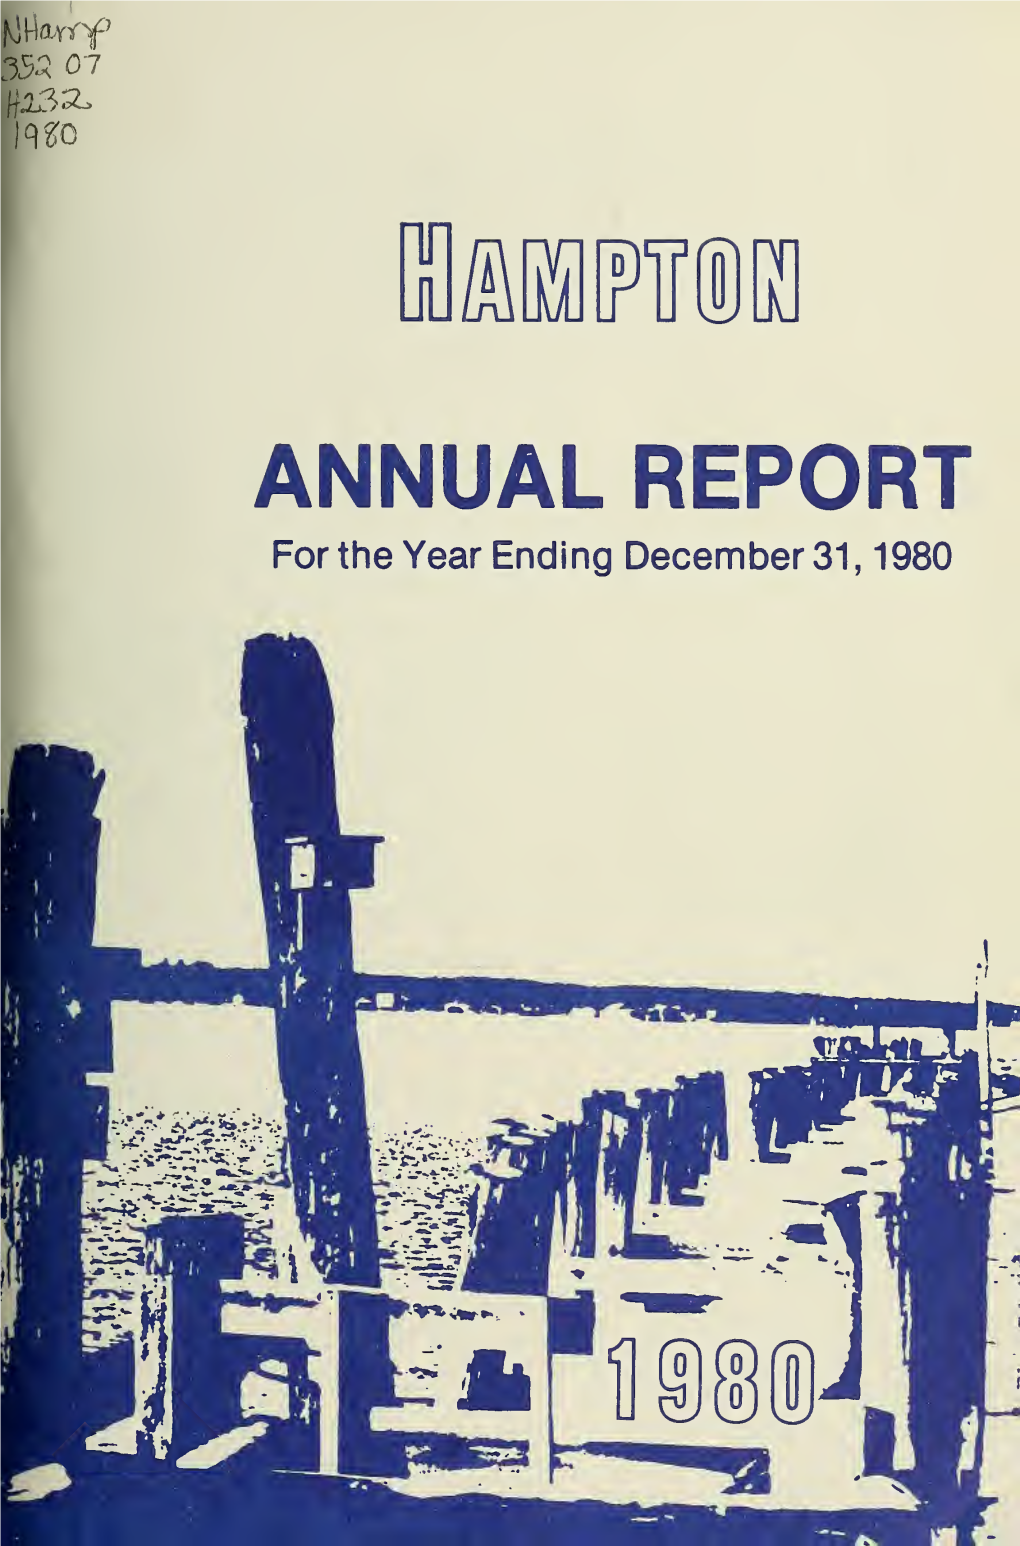 Annual Report of the Town of Hampton, New Hampshire